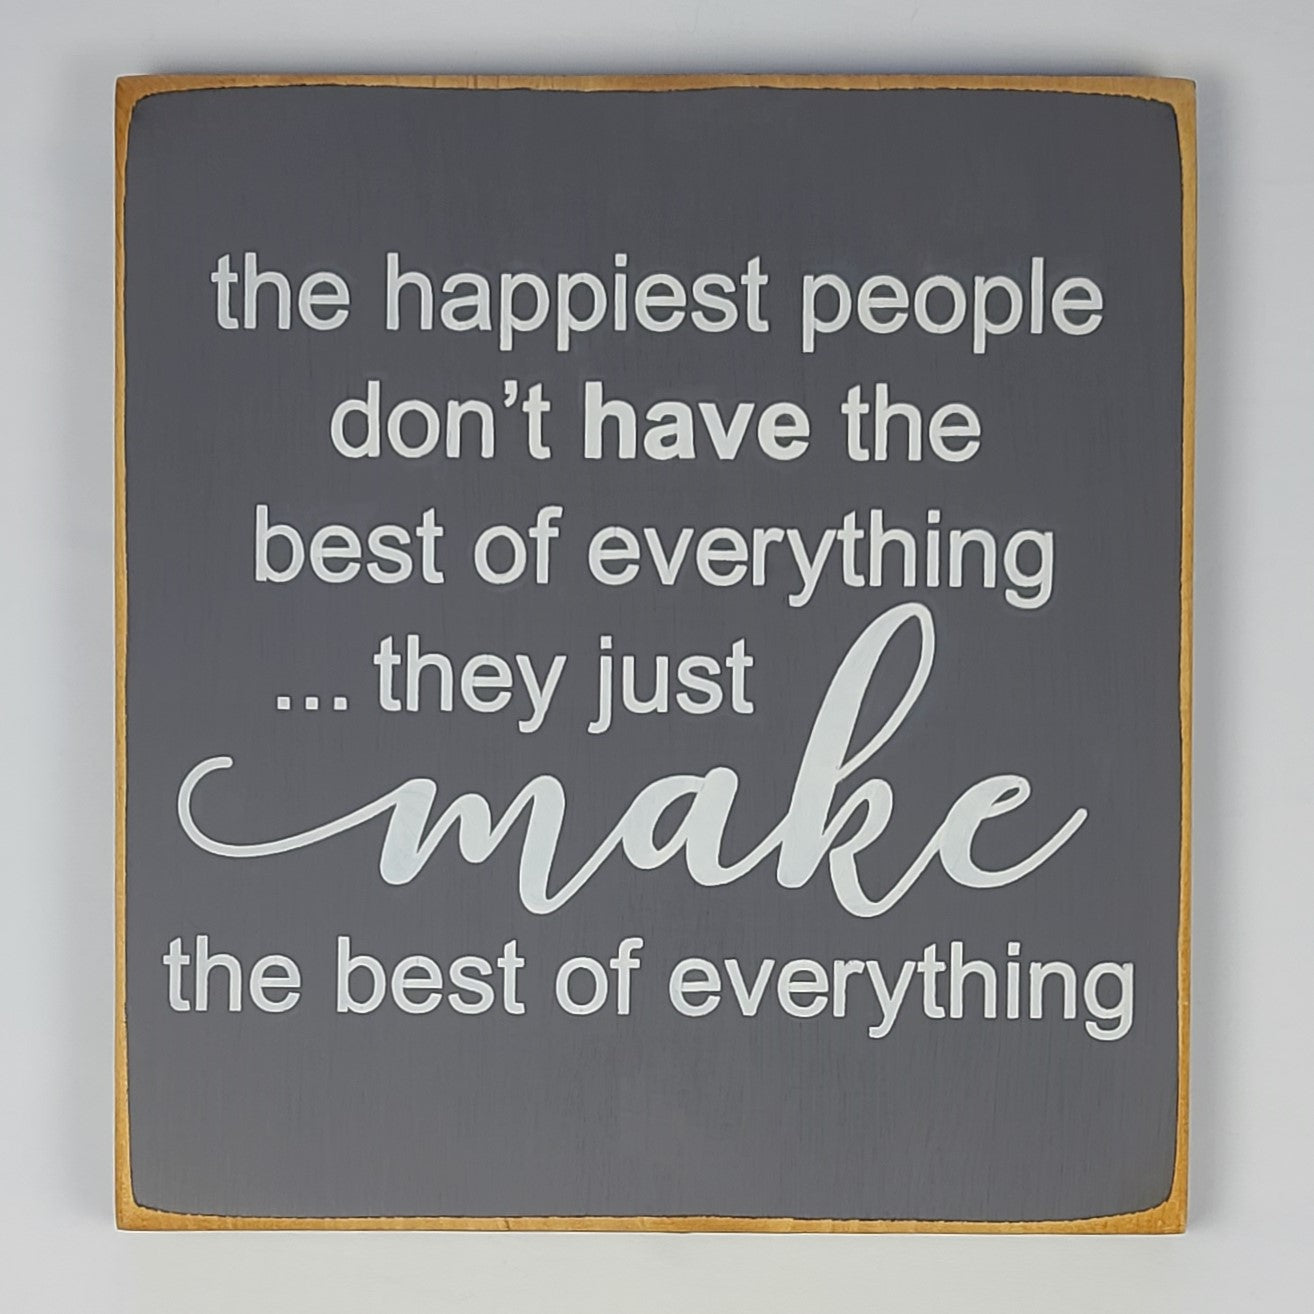 Happiest People Don't Have The Best Of Everything - Inspirational Wooden Sign